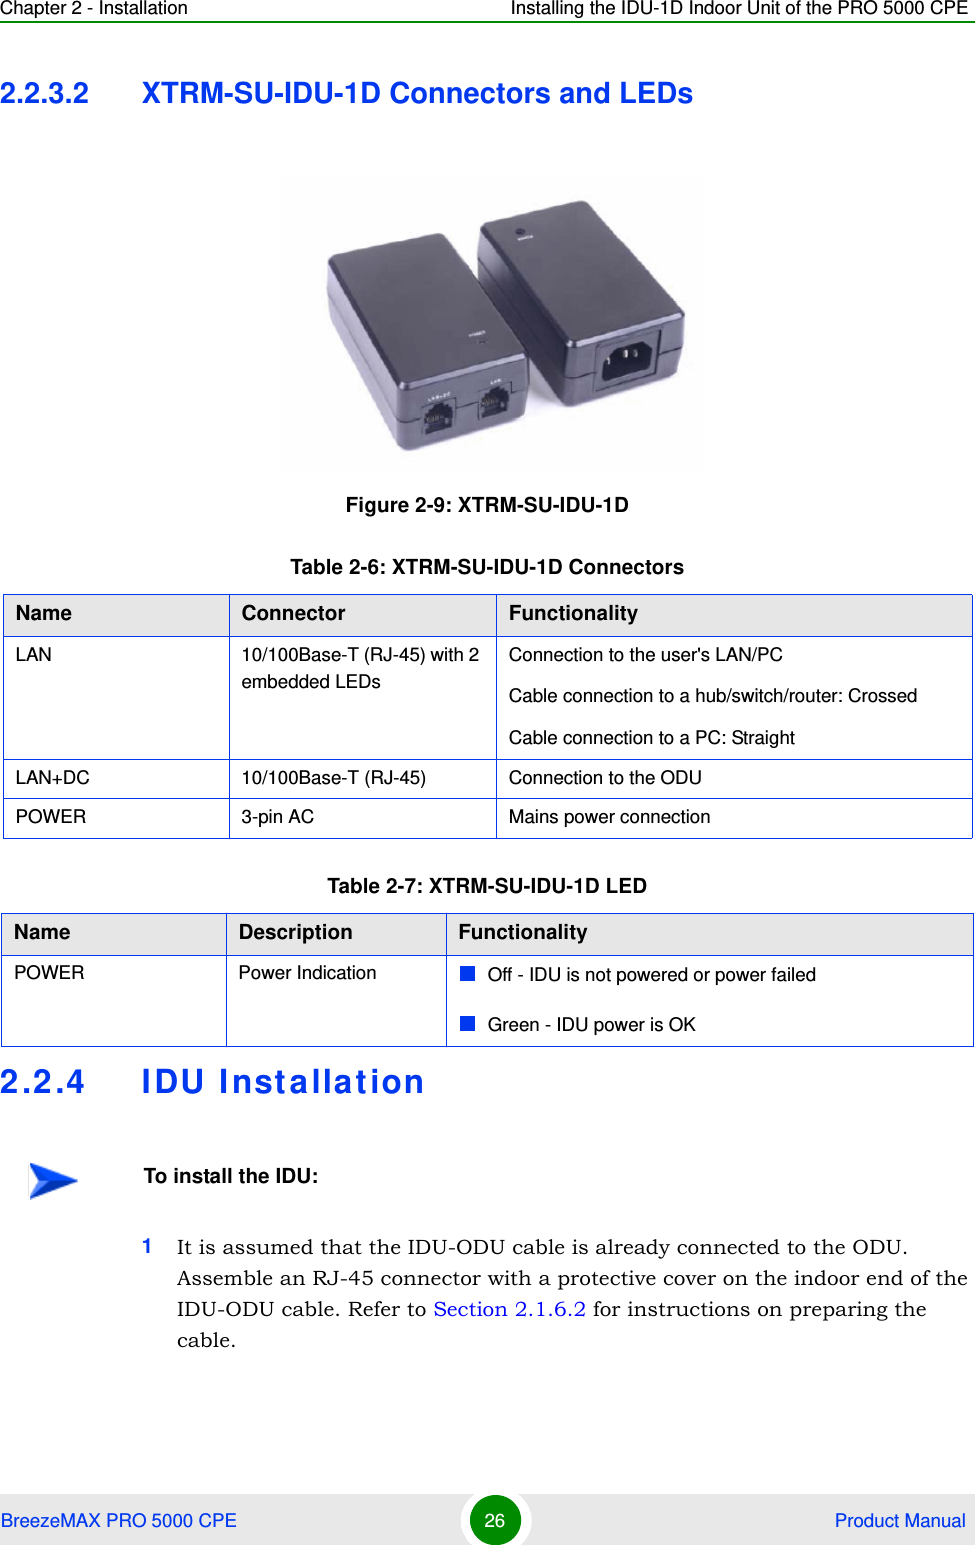 Chapter 2 - Installation Installing the IDU-1D Indoor Unit of the PRO 5000 CPEBreezeMAX PRO 5000 CPE 26  Product Manual2.2.3.2 XTRM-SU-IDU-1D Connectors and LEDs2.2.4 IDU Installation1It is assumed that the IDU-ODU cable is already connected to the ODU. Assemble an RJ-45 connector with a protective cover on the indoor end of the IDU-ODU cable. Refer to Section 2.1.6.2 for instructions on preparing the cable.Figure 2-9: XTRM-SU-IDU-1DTable 2-6: XTRM-SU-IDU-1D ConnectorsName Connector FunctionalityLAN 10/100Base-T (RJ-45) with 2 embedded LEDsConnection to the user&apos;s LAN/PCCable connection to a hub/switch/router: CrossedCable connection to a PC: StraightLAN+DC 10/100Base-T (RJ-45) Connection to the ODUPOWER 3-pin AC  Mains power connectionTable 2-7: XTRM-SU-IDU-1D LEDName  Description FunctionalityPOWER Power Indication Off - IDU is not powered or power failedGreen - IDU power is OKTo install the IDU: